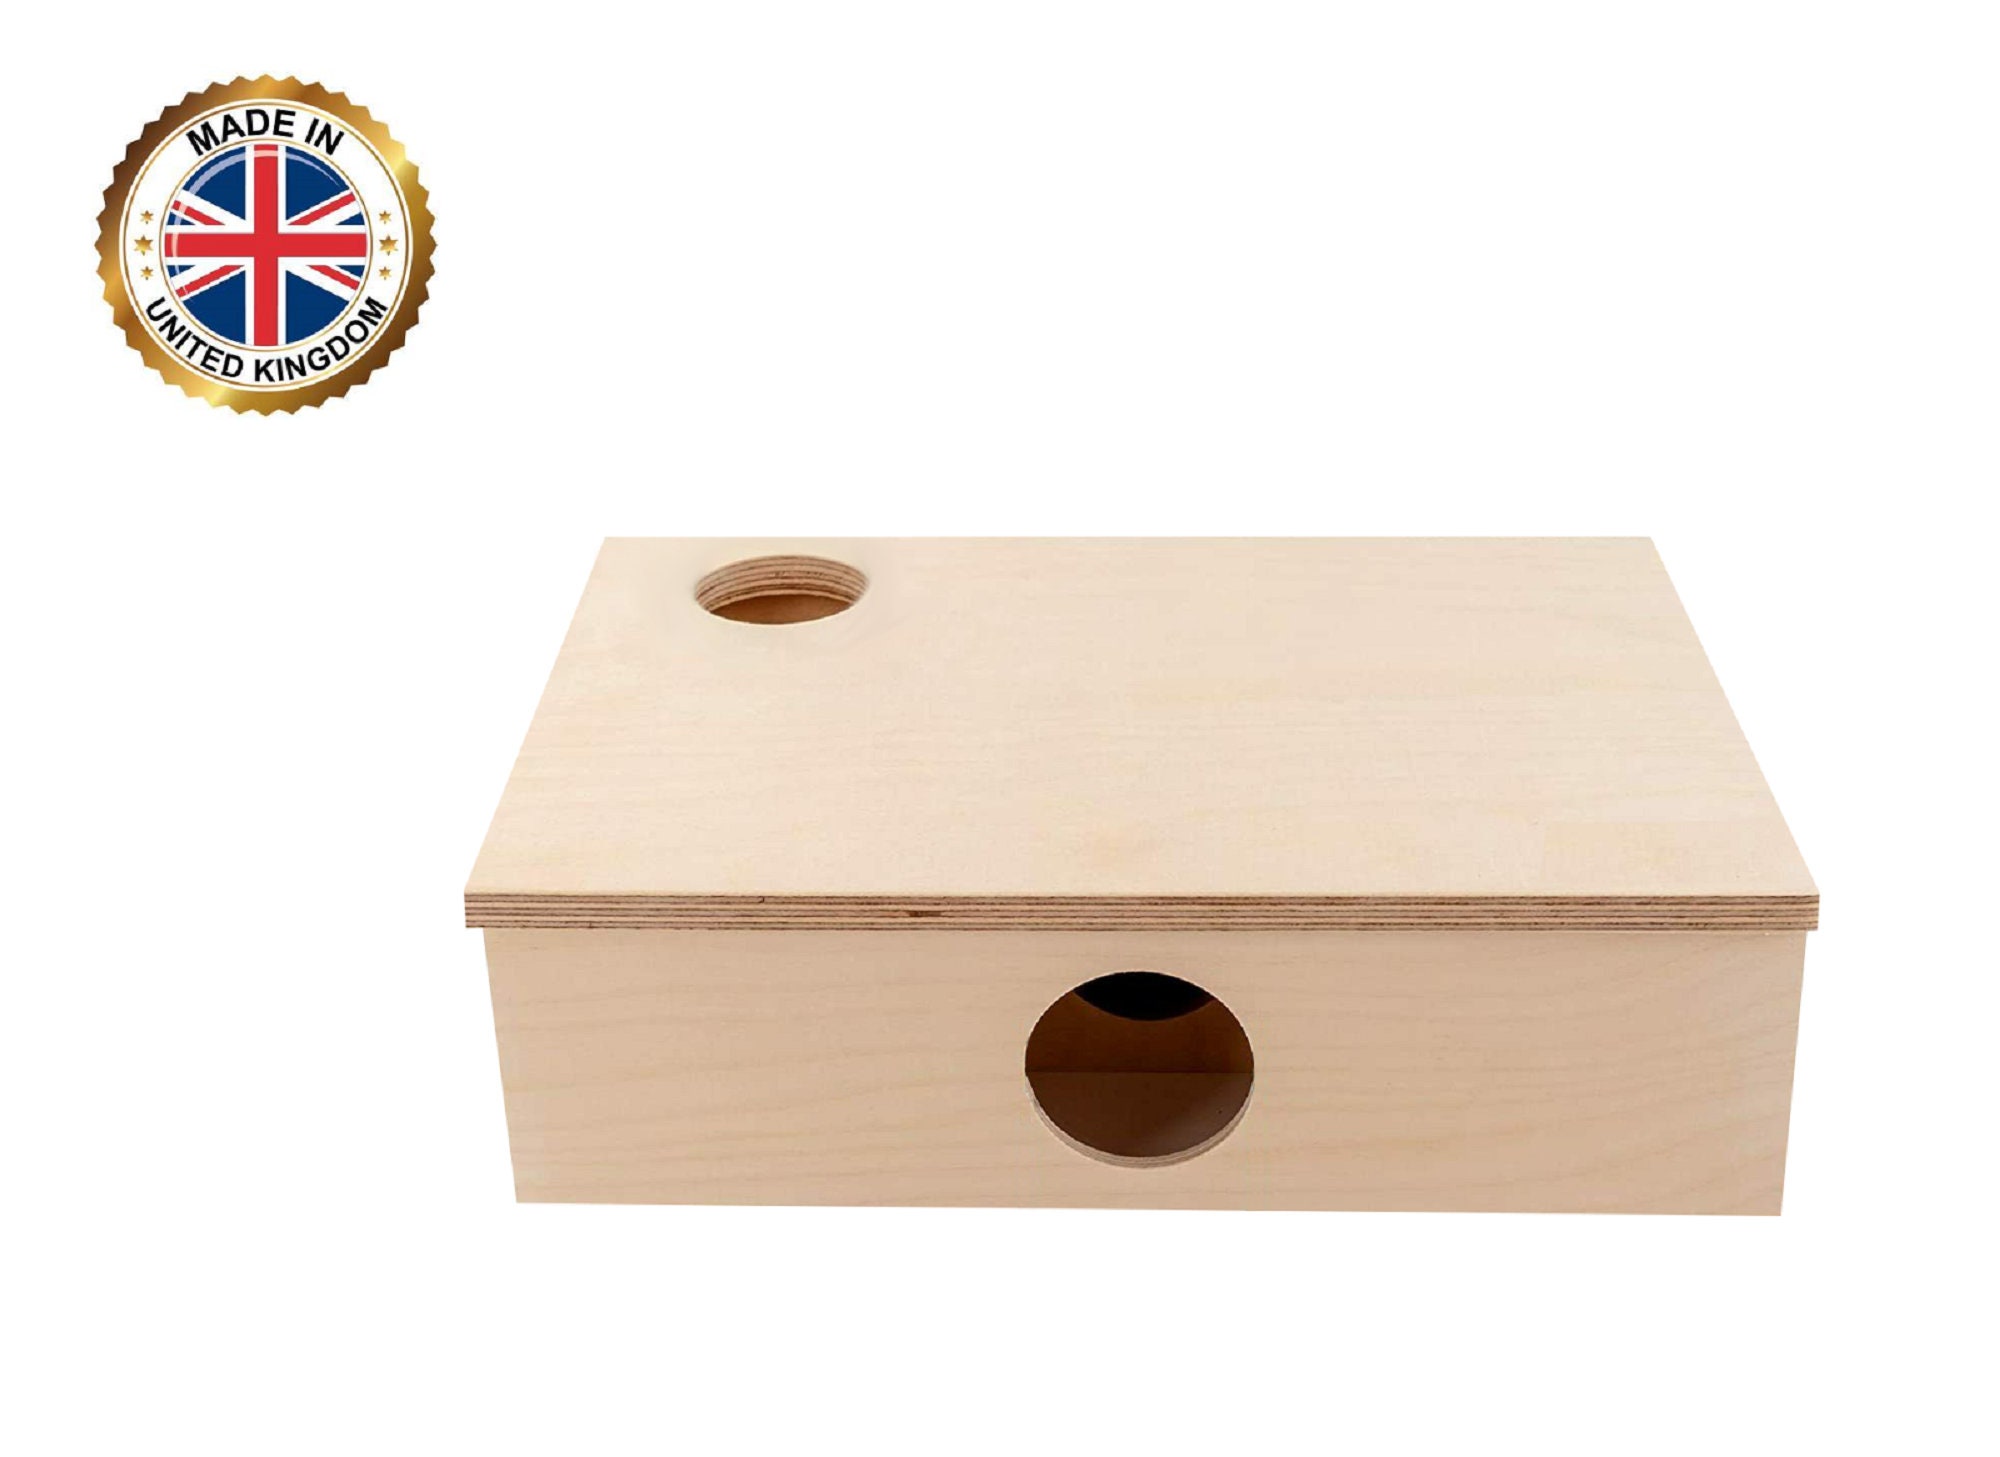 YKD Natural Wood Multi Chamber Hamster House Hamster Explore Tunnel Maze Toys for Hamster Mice Gerbils Mouse Syrian Hamsters Small Animals Hideout House 